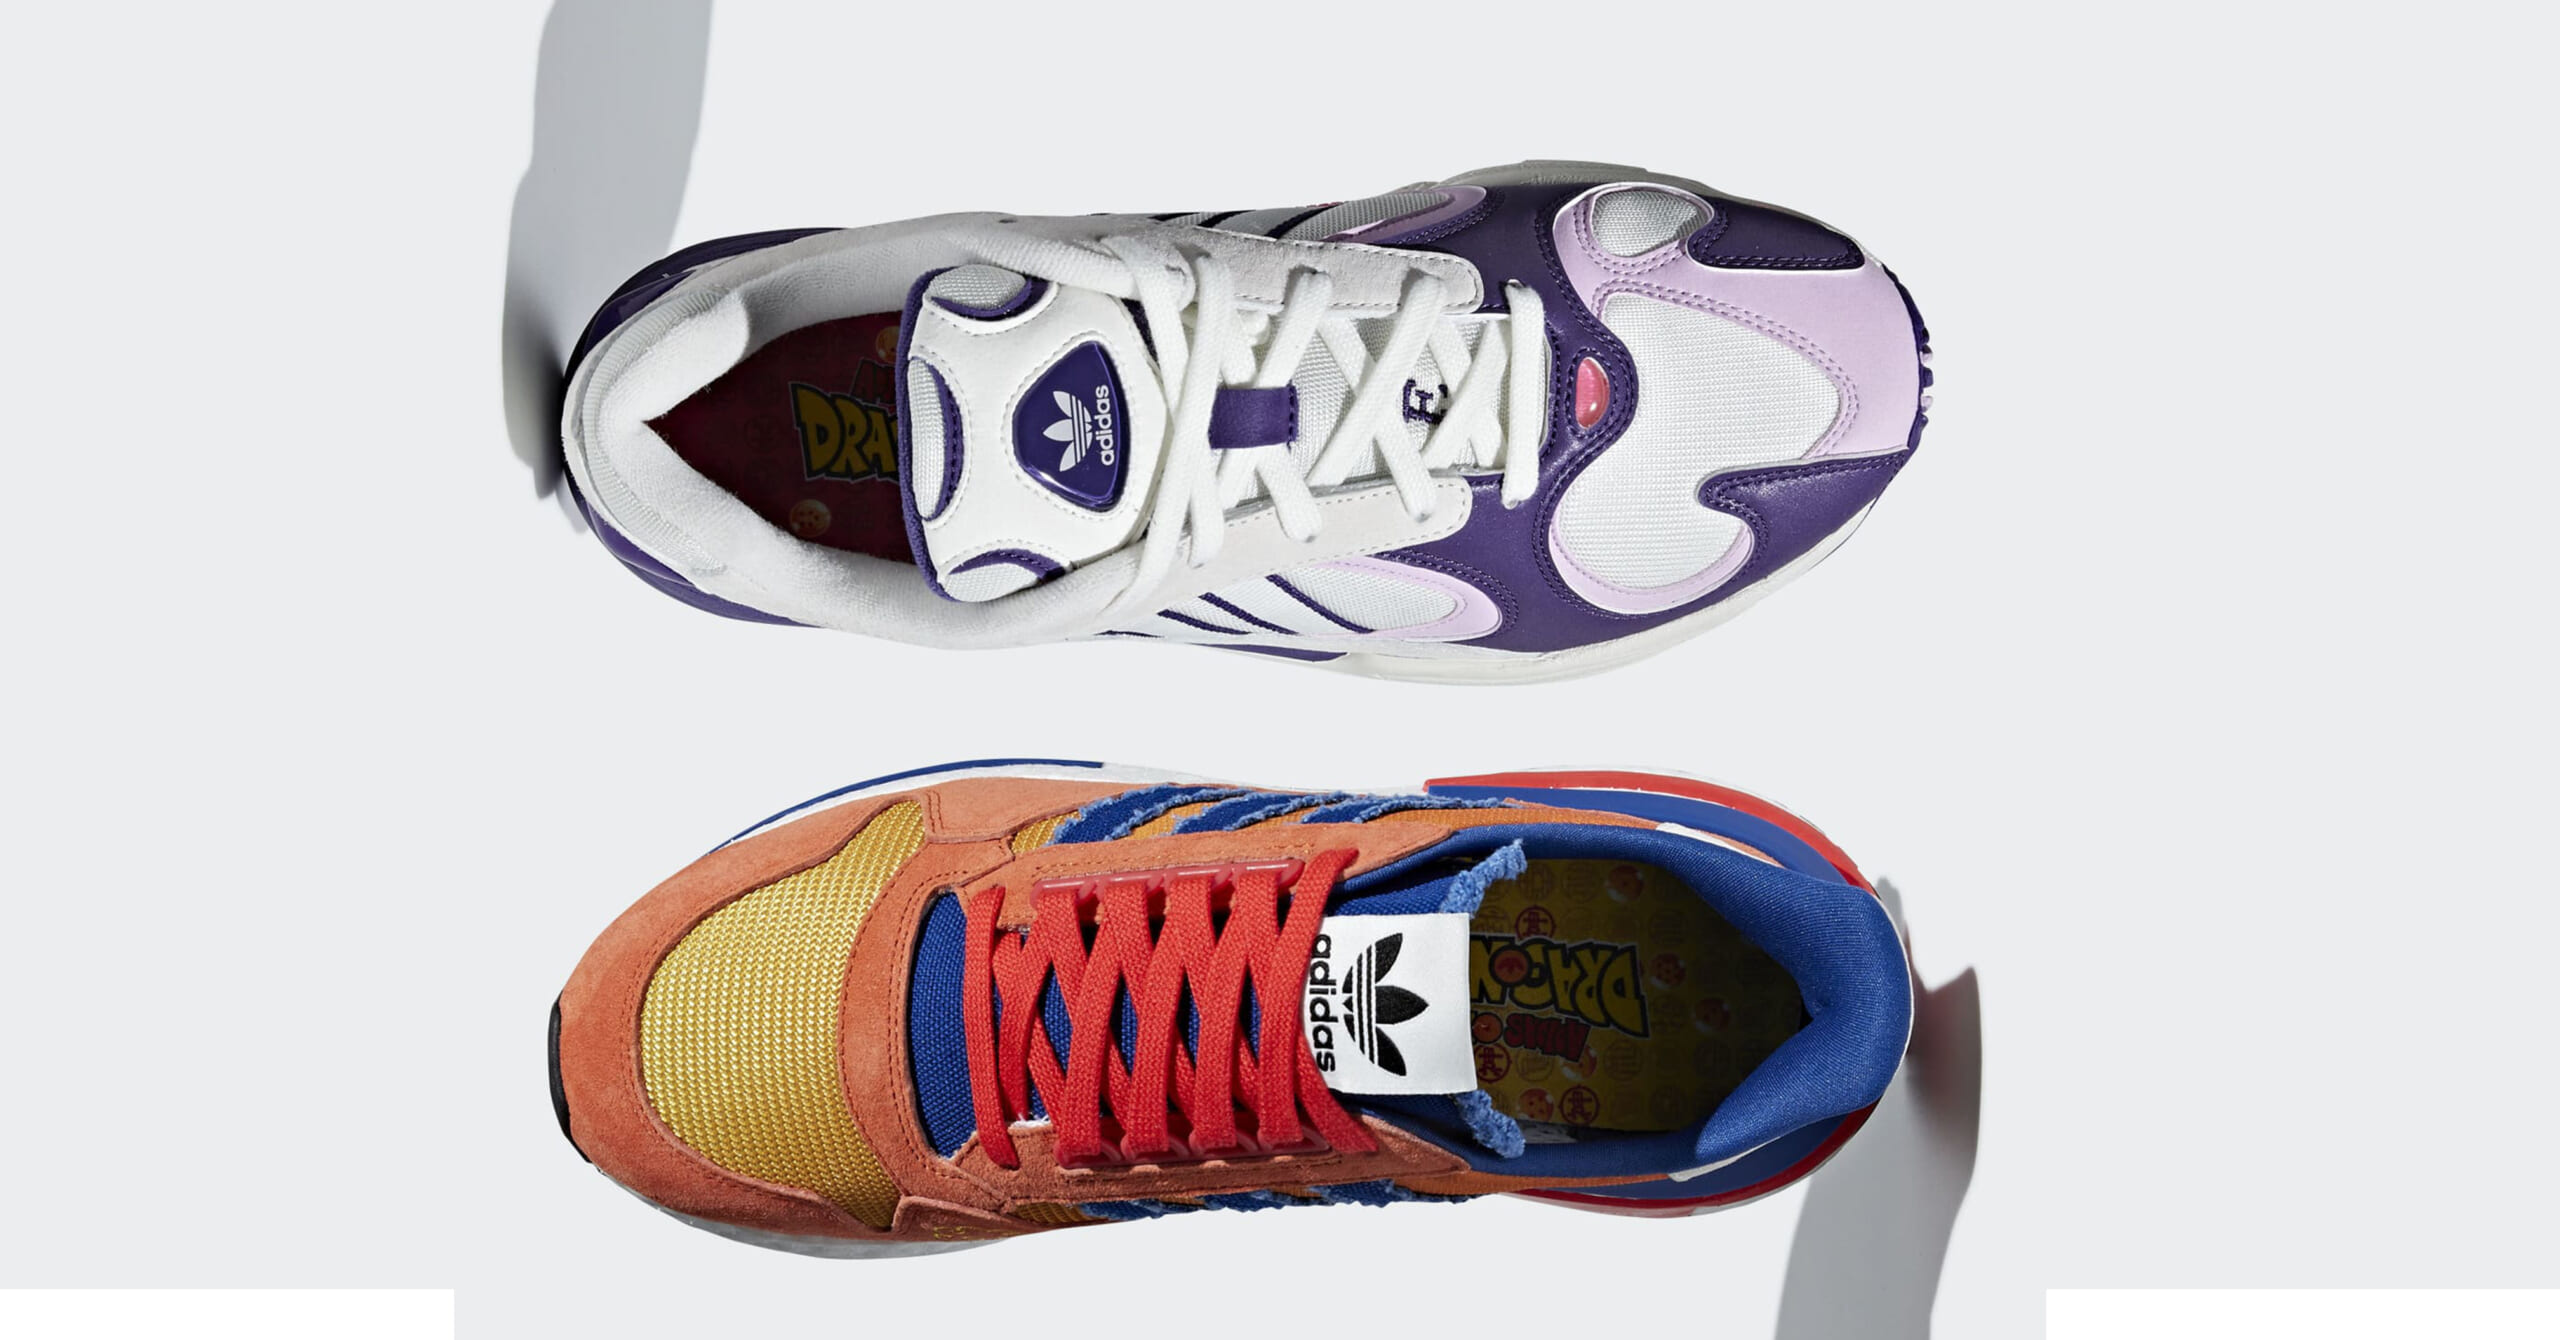 Ball Z Adidas Sneakers Are Finally Here - Maxim